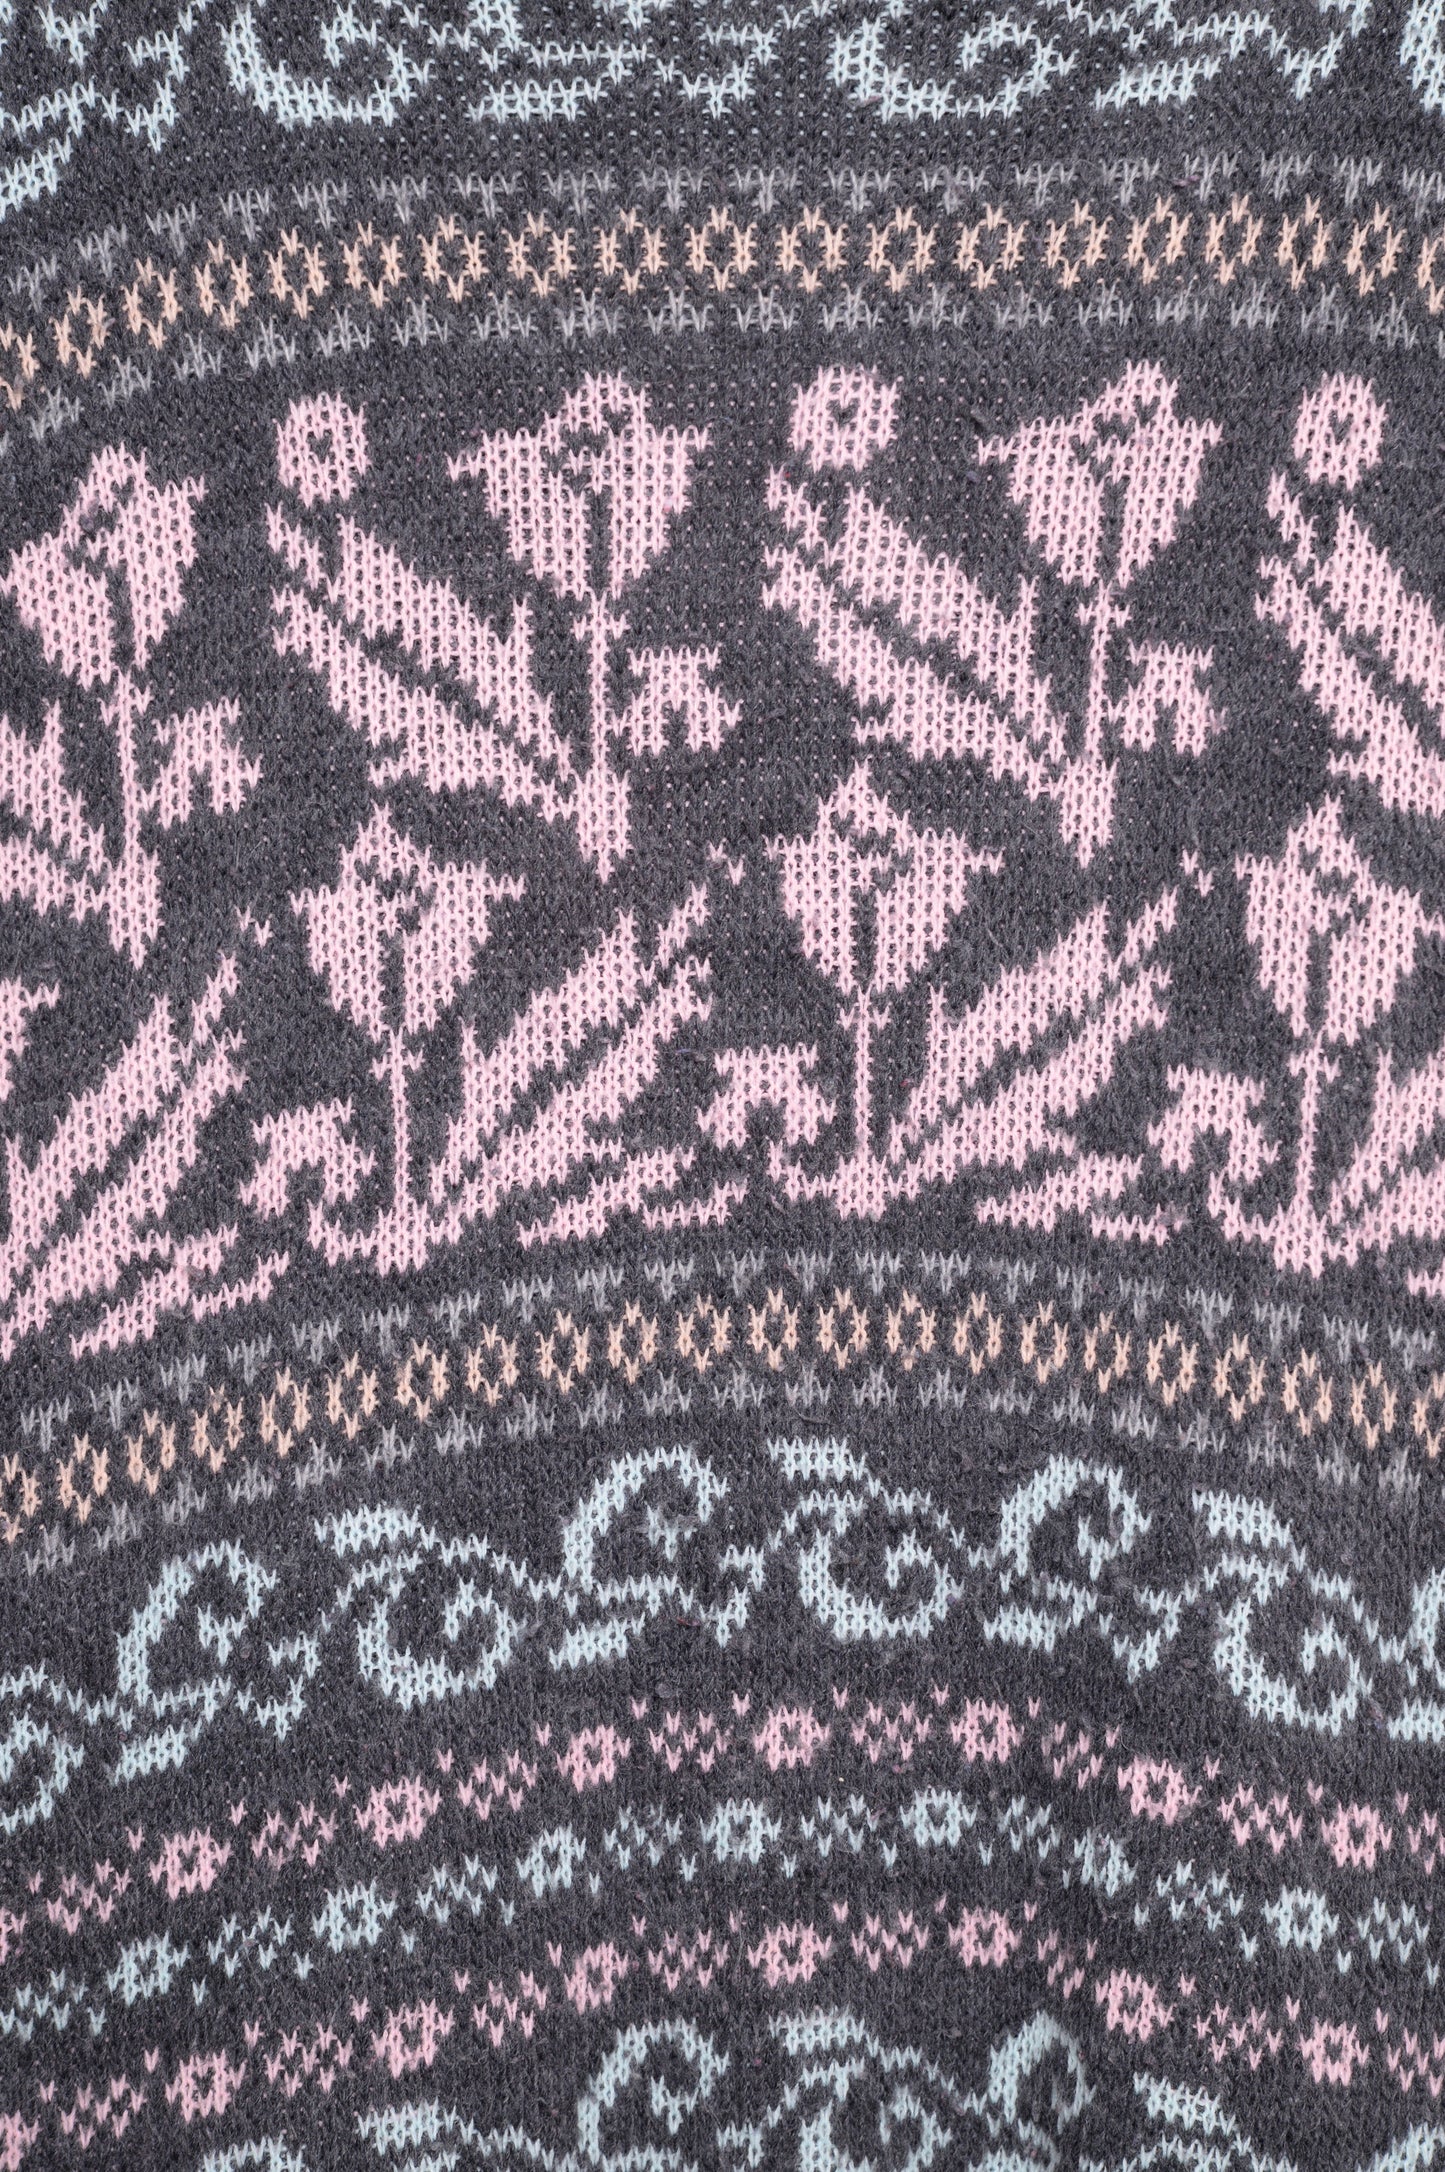 1990s Floral Sweater